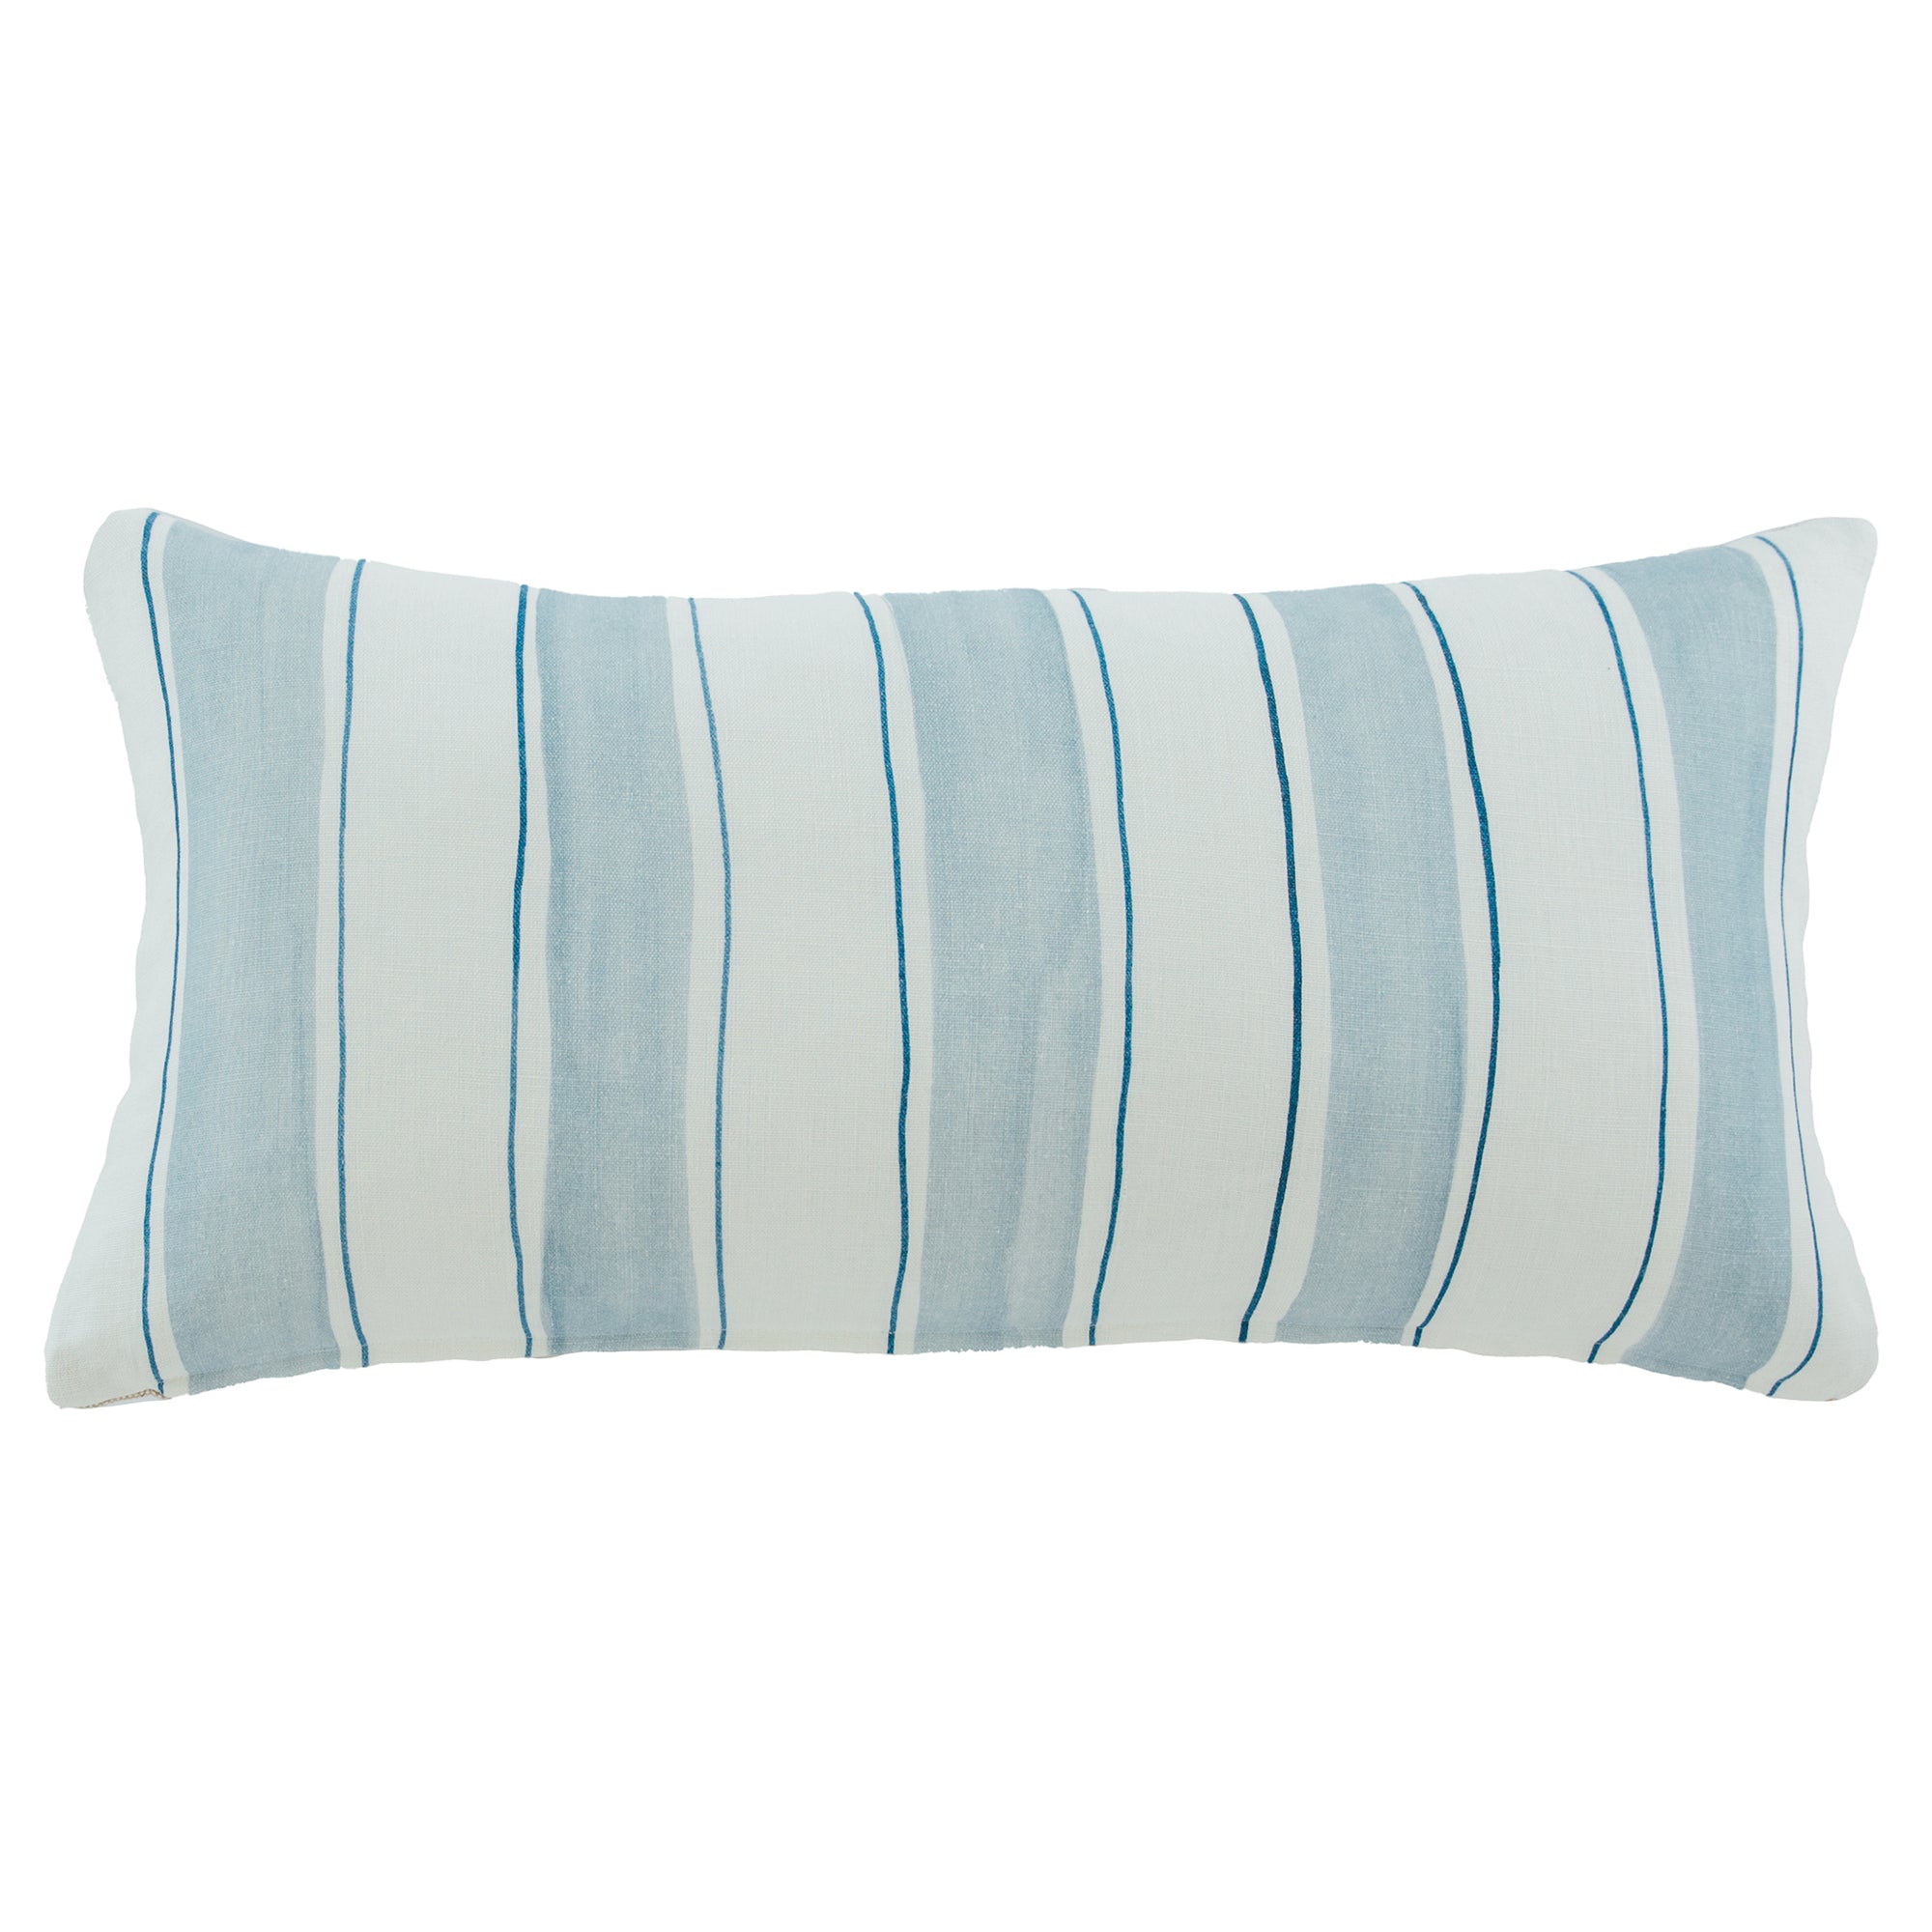 Tracing Stripe Sky Pillow Cover